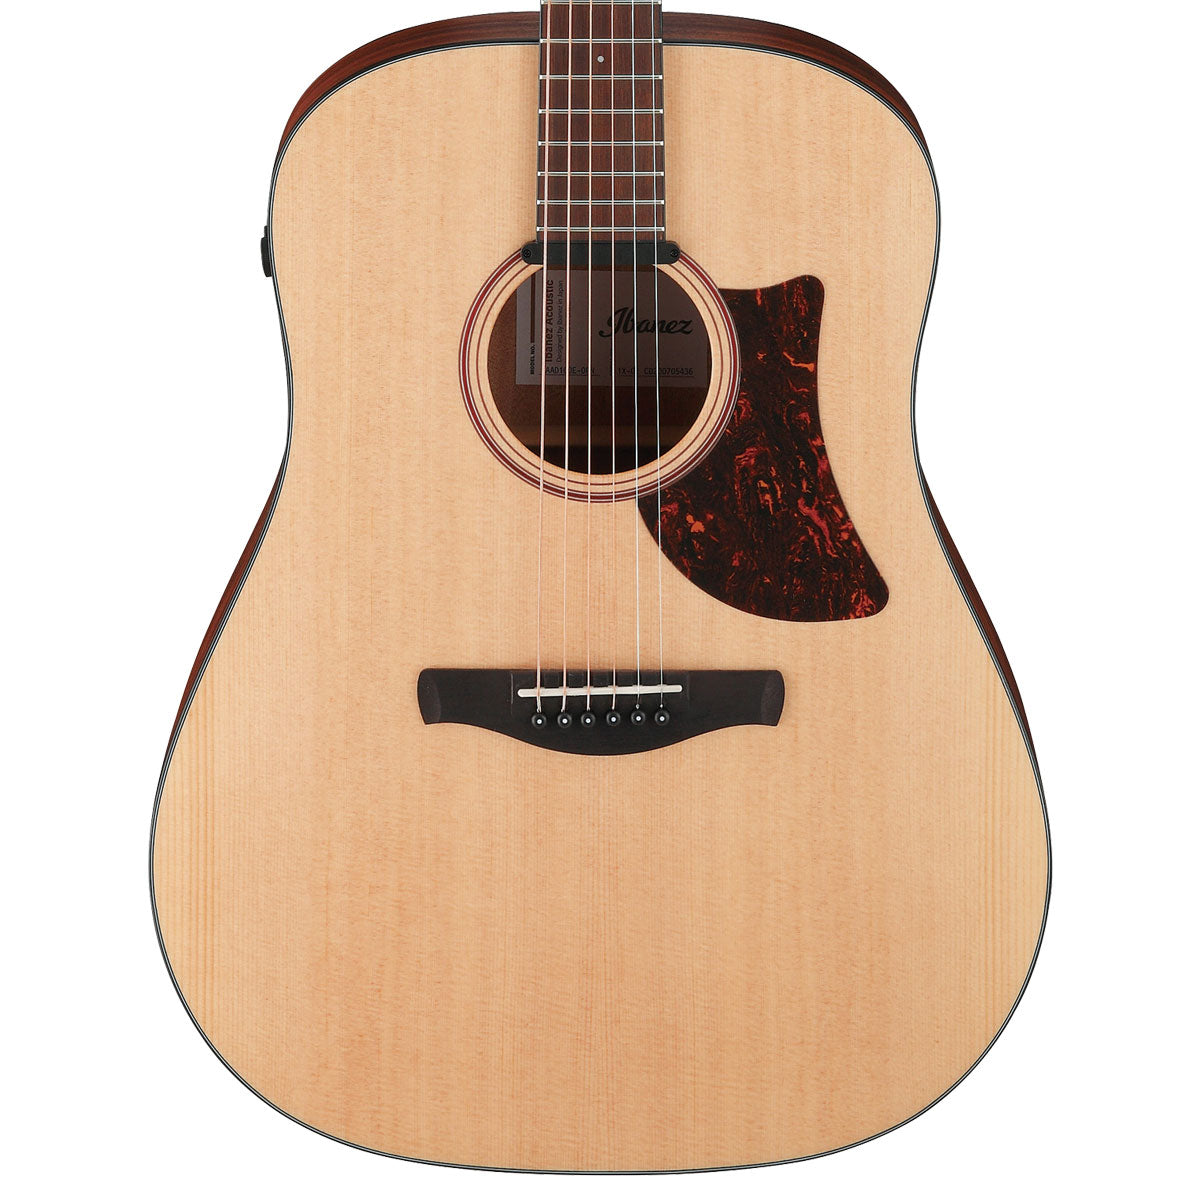 Close-up top view of Ibanez AAD100E Acoustic-Electric Guitar - Open Pore Natural showing body and portion of fingerboard